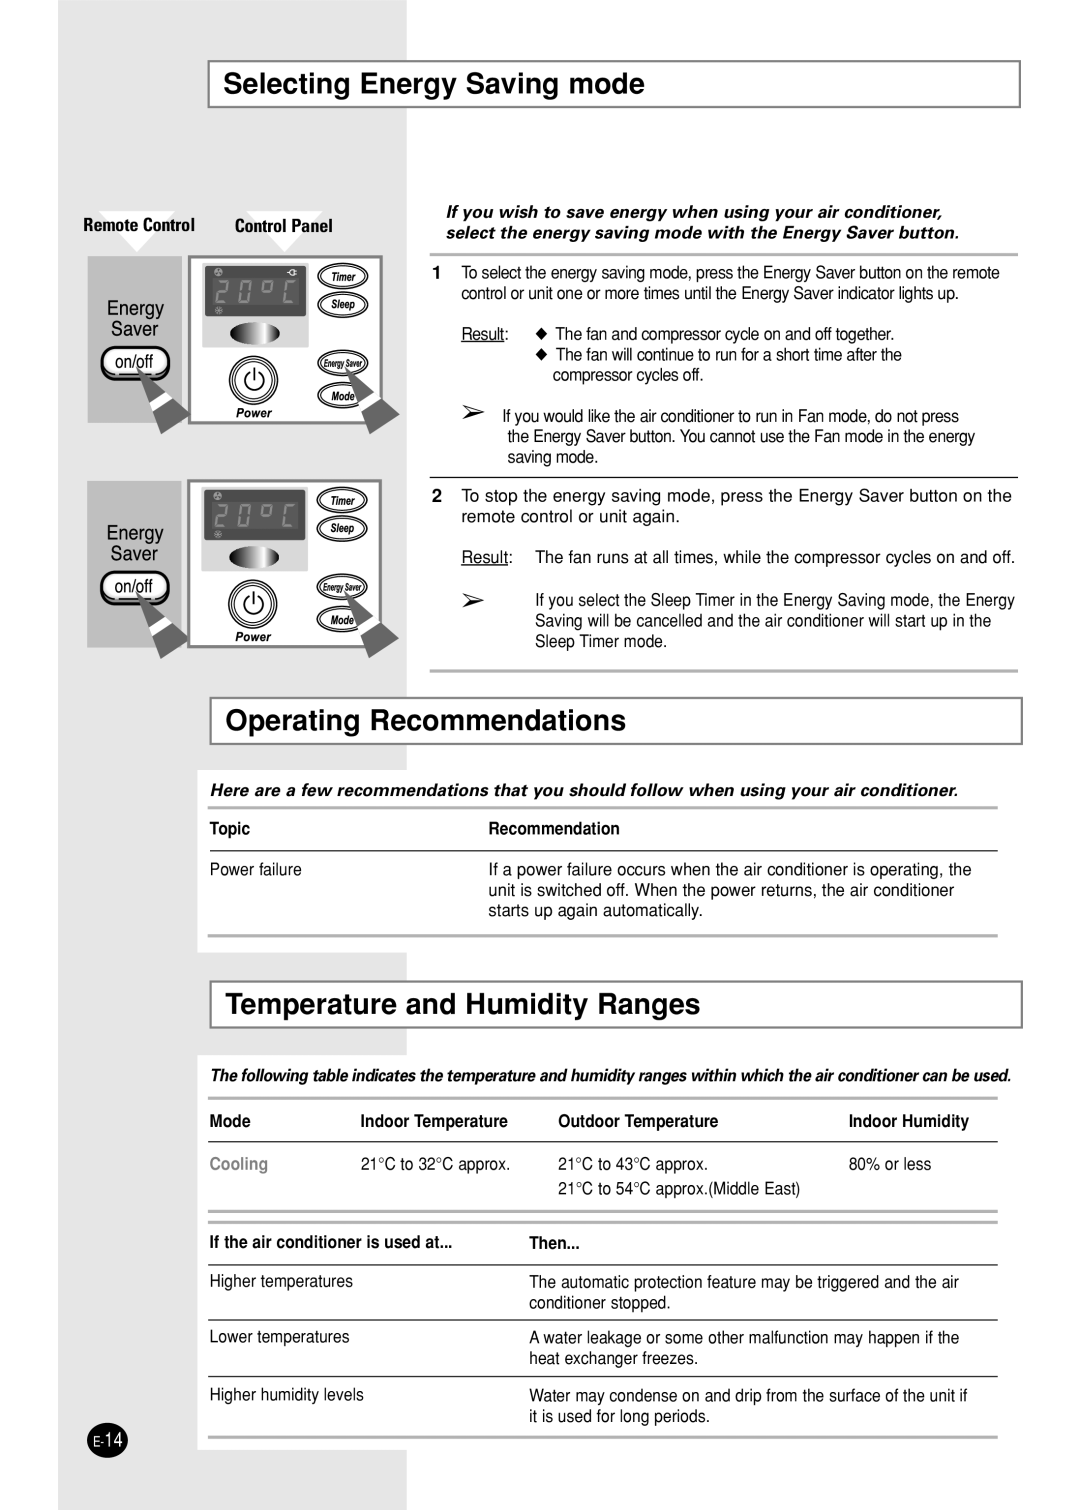 Samsung AWT20FBMBA Selecting Energy Saving mode, Operating Recommendations, Temperature and Humidity Ranges, Control Panel 